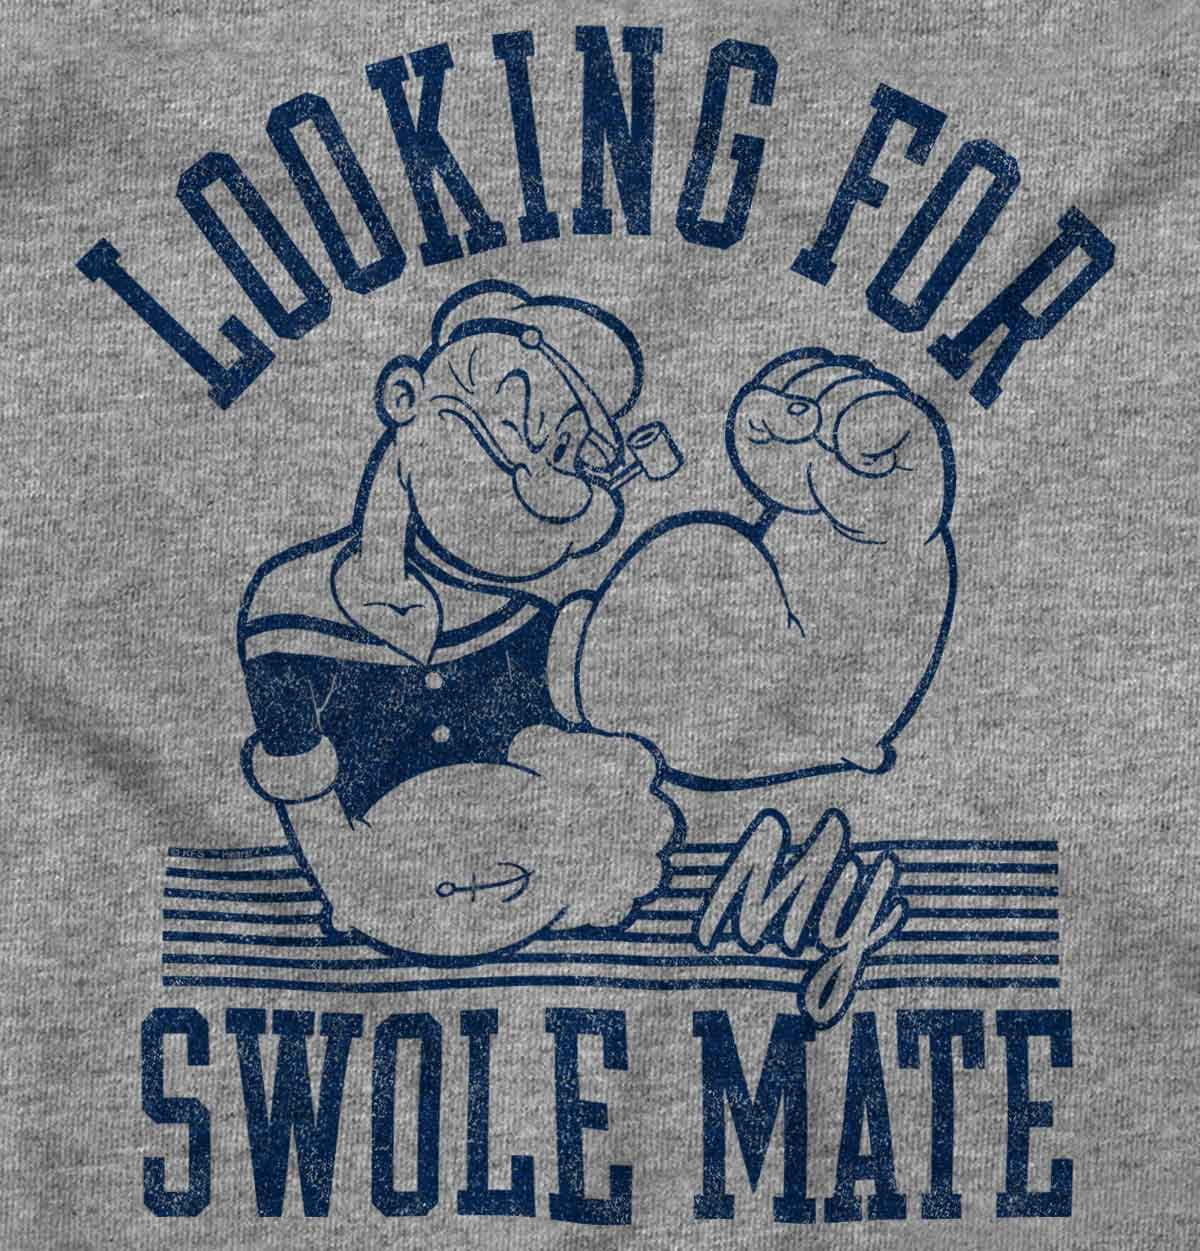 Popeye Looking For a Swole Mate Gym Men's Graphic T Shirt Tees Brisco Brands  5X 